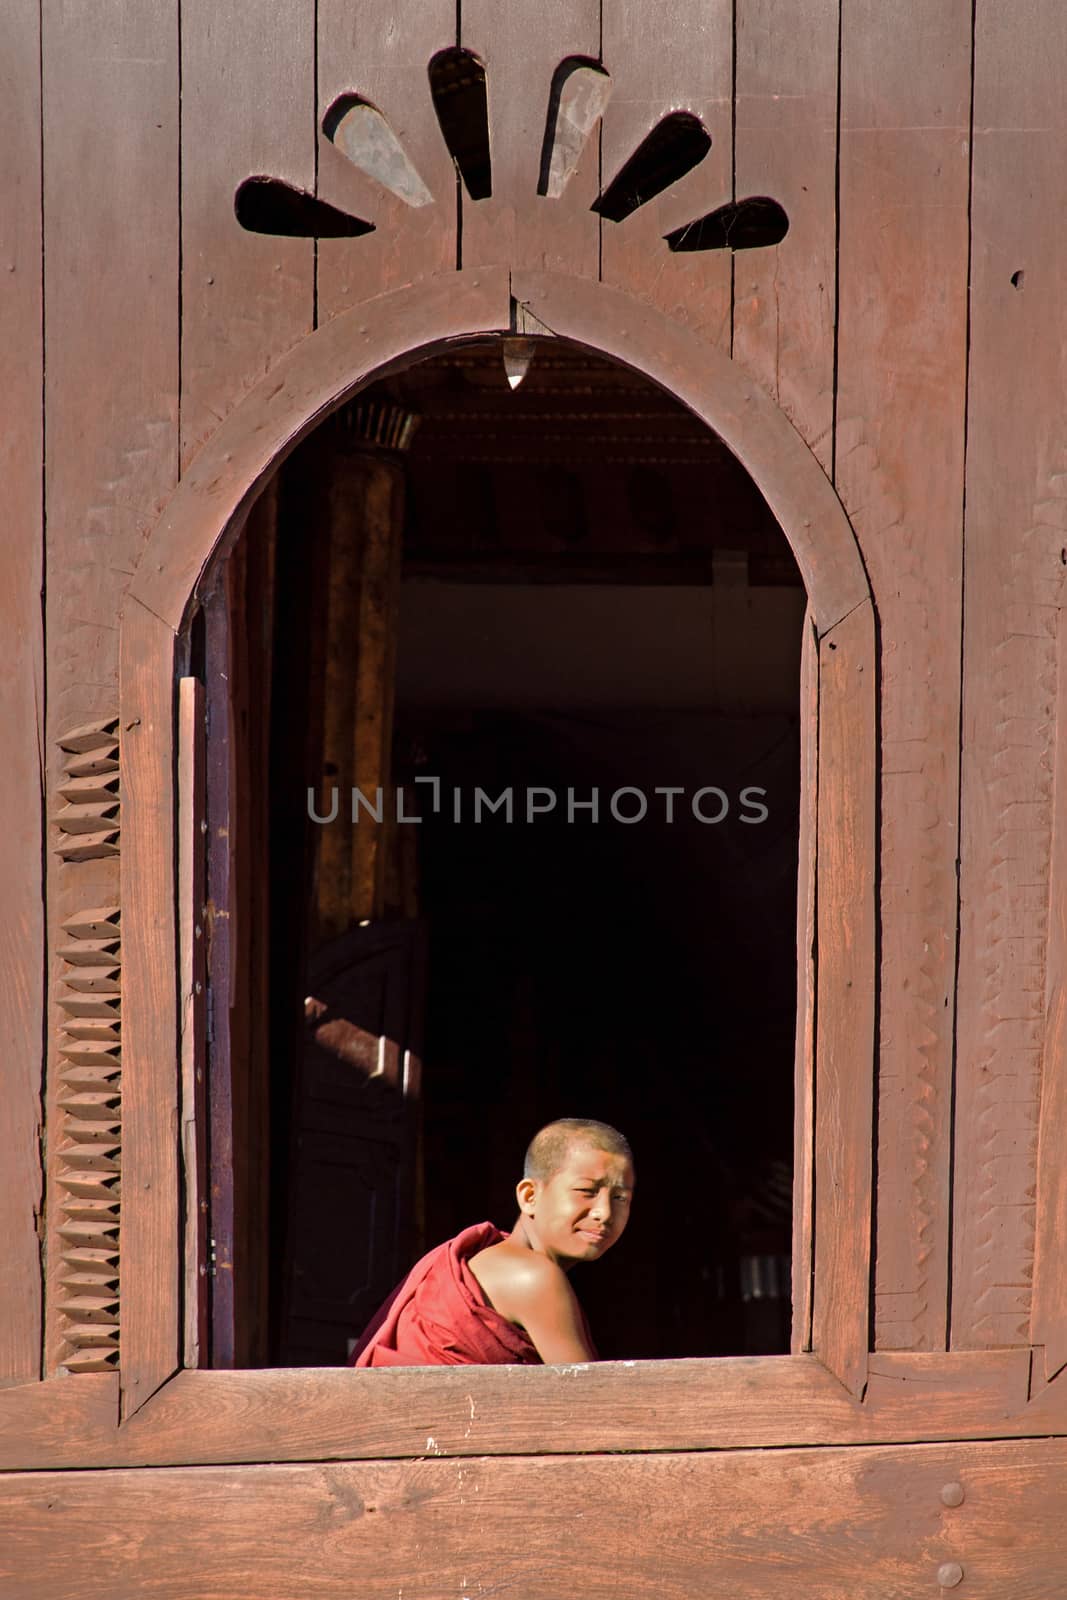 NLE,MYANMAR-Novemberl 24 : Young novice monk at window wooden Church of Nyan Shwe Kgua temple near Inle lake on November 24,2015 in Inle lake,Shan State ,Middle of Myanmar.